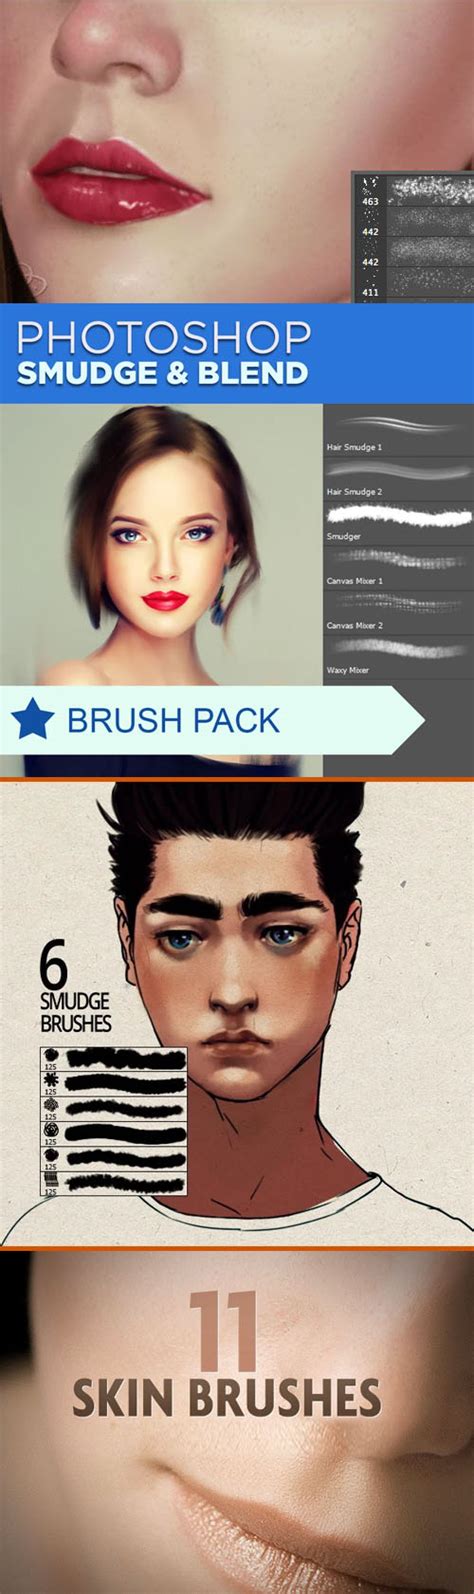 Human Skin & Smudge Brushes Collection for Photoshop » NULLED.org ...